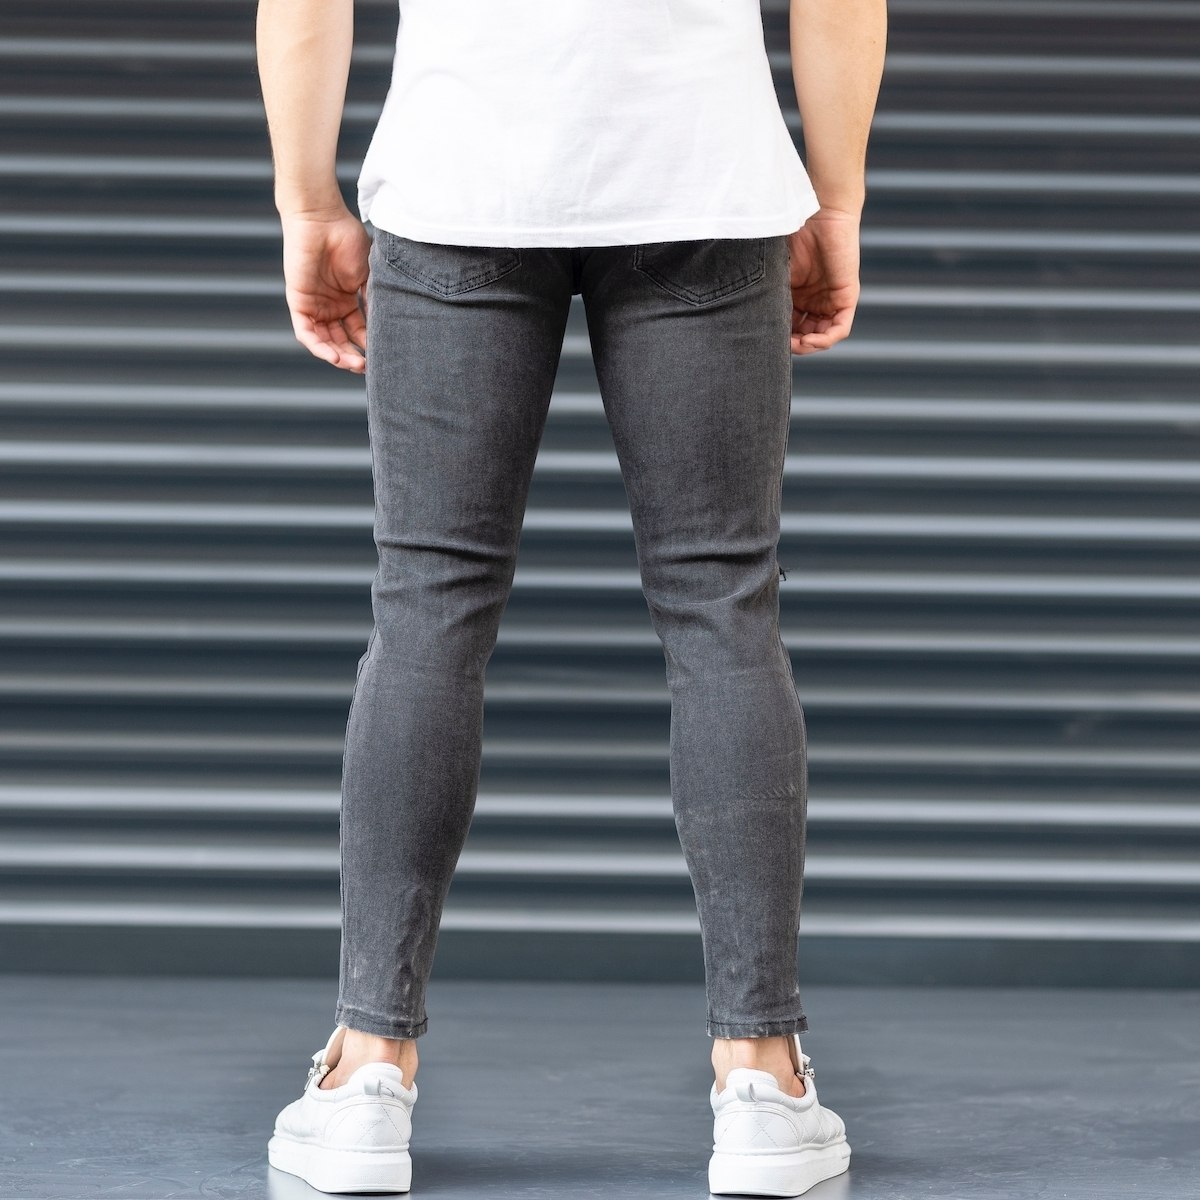 Men's Jeans With Rips In Smoked Gray - 4